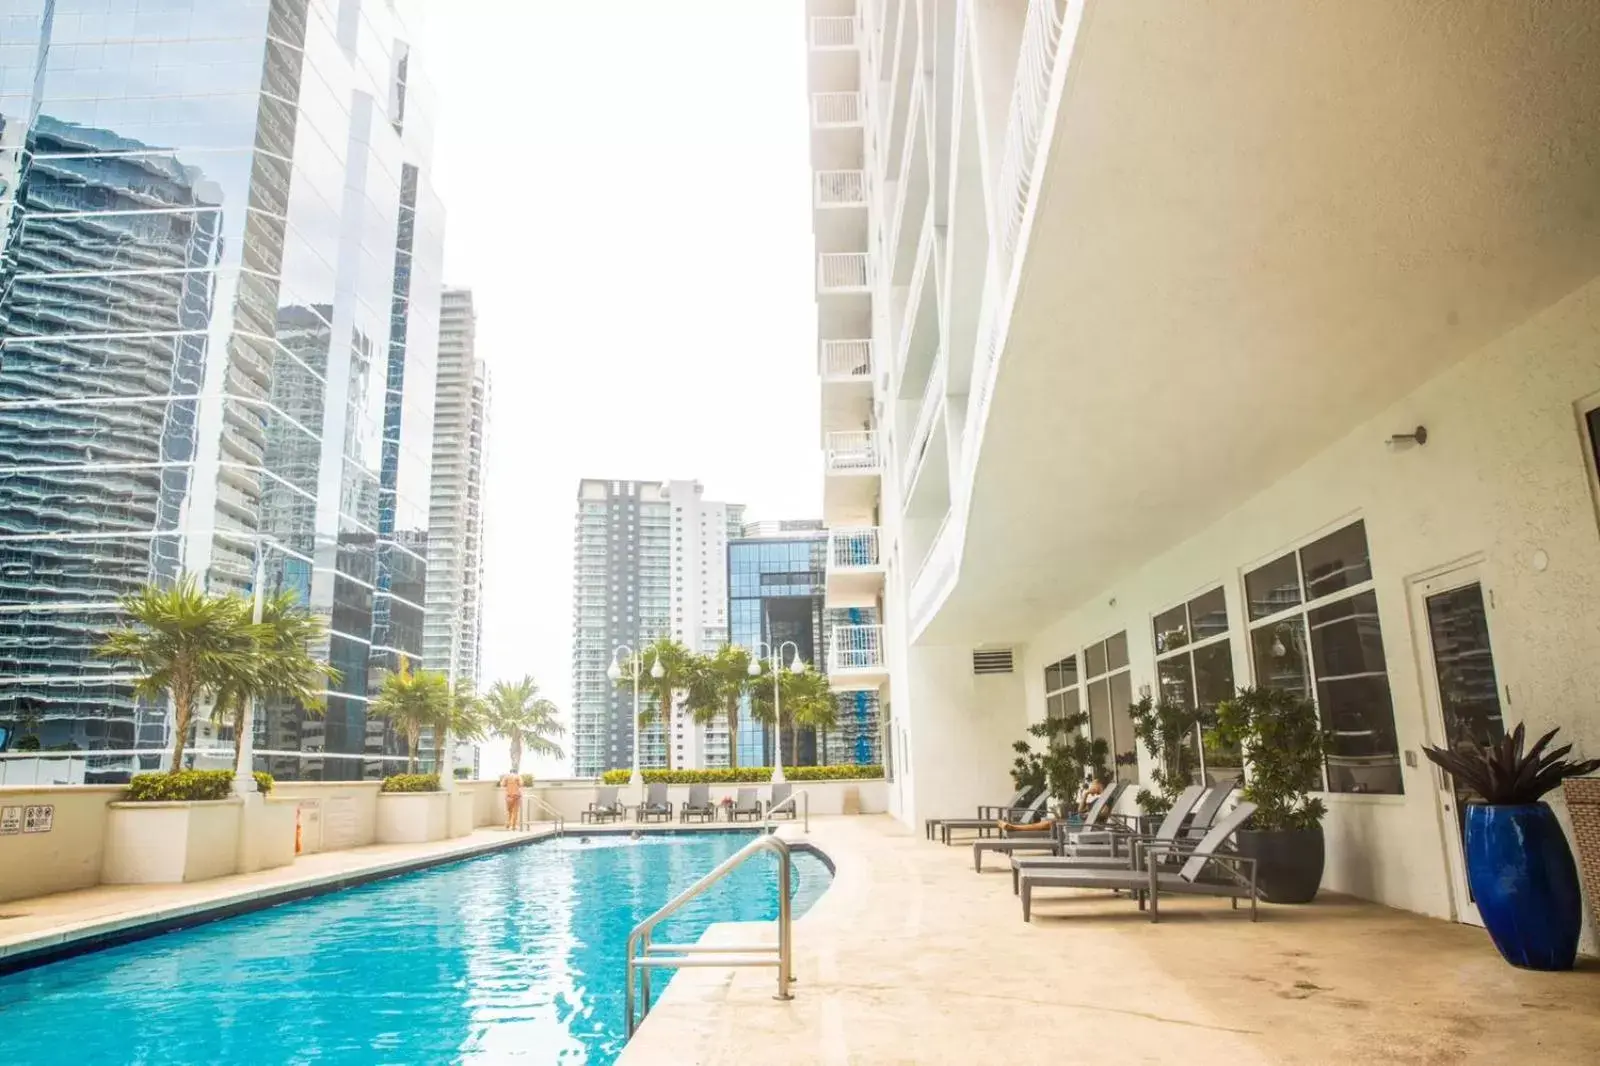 Swimming Pool in Modern and Luxurious Brickell Studio